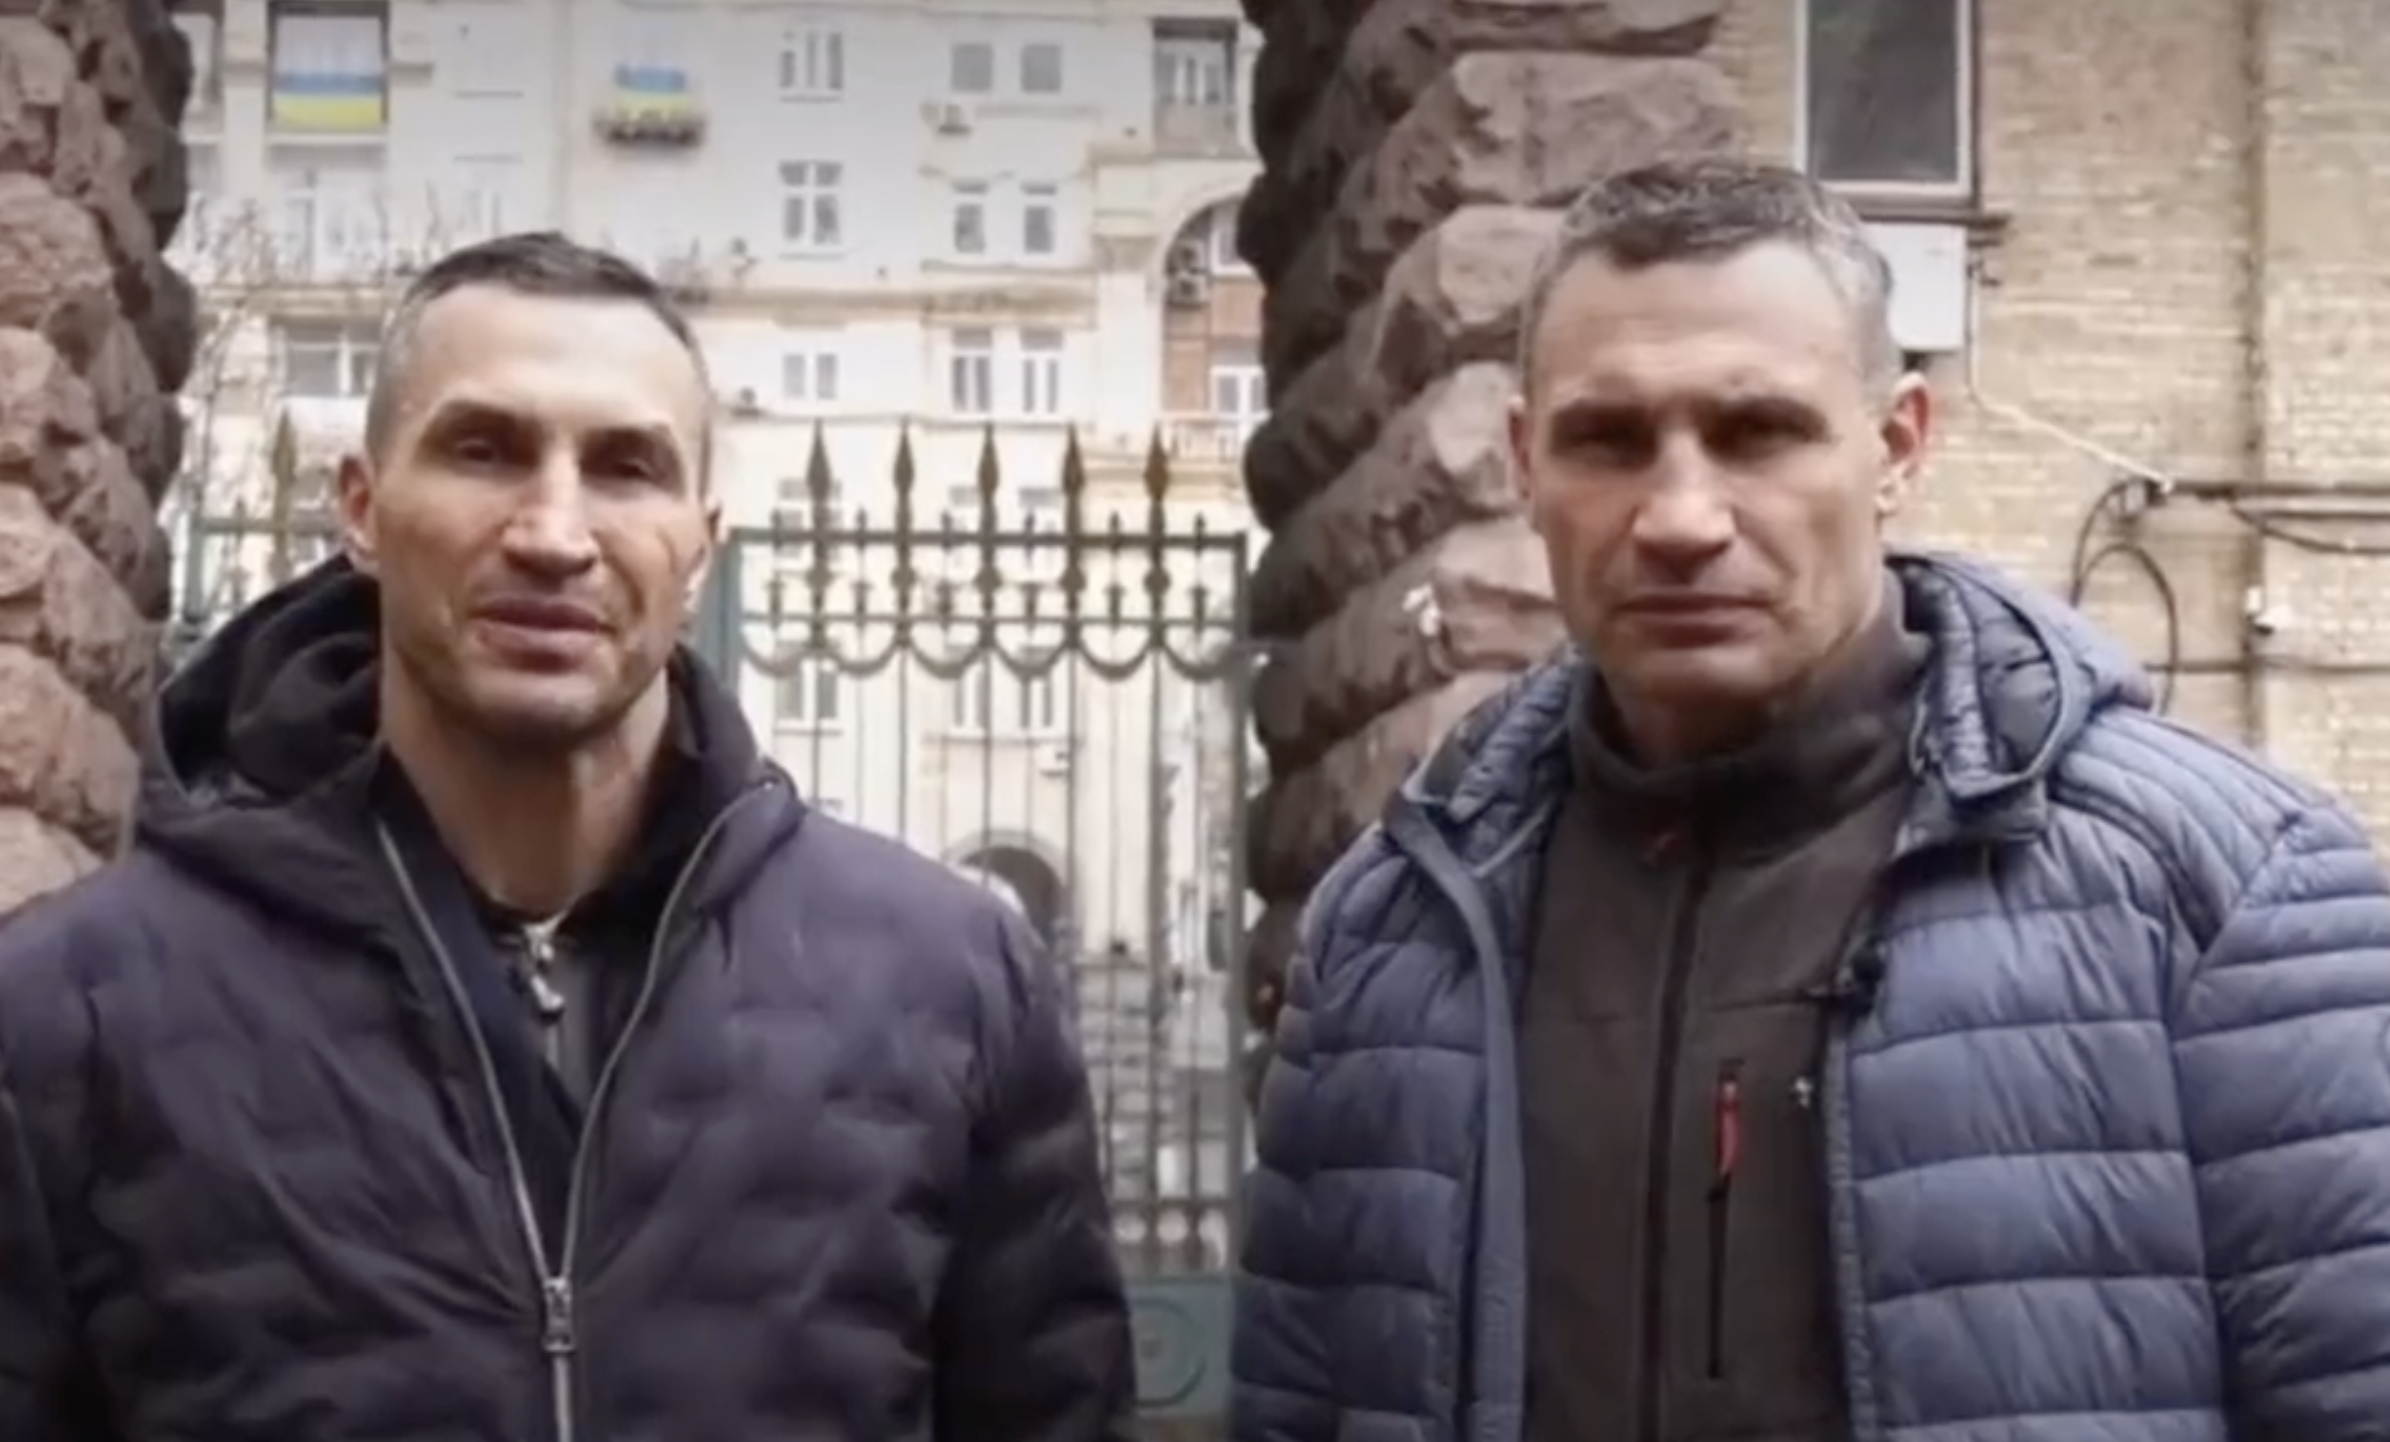 Boxing champion Klitchsko brothers take up arms in defense of Ukraine